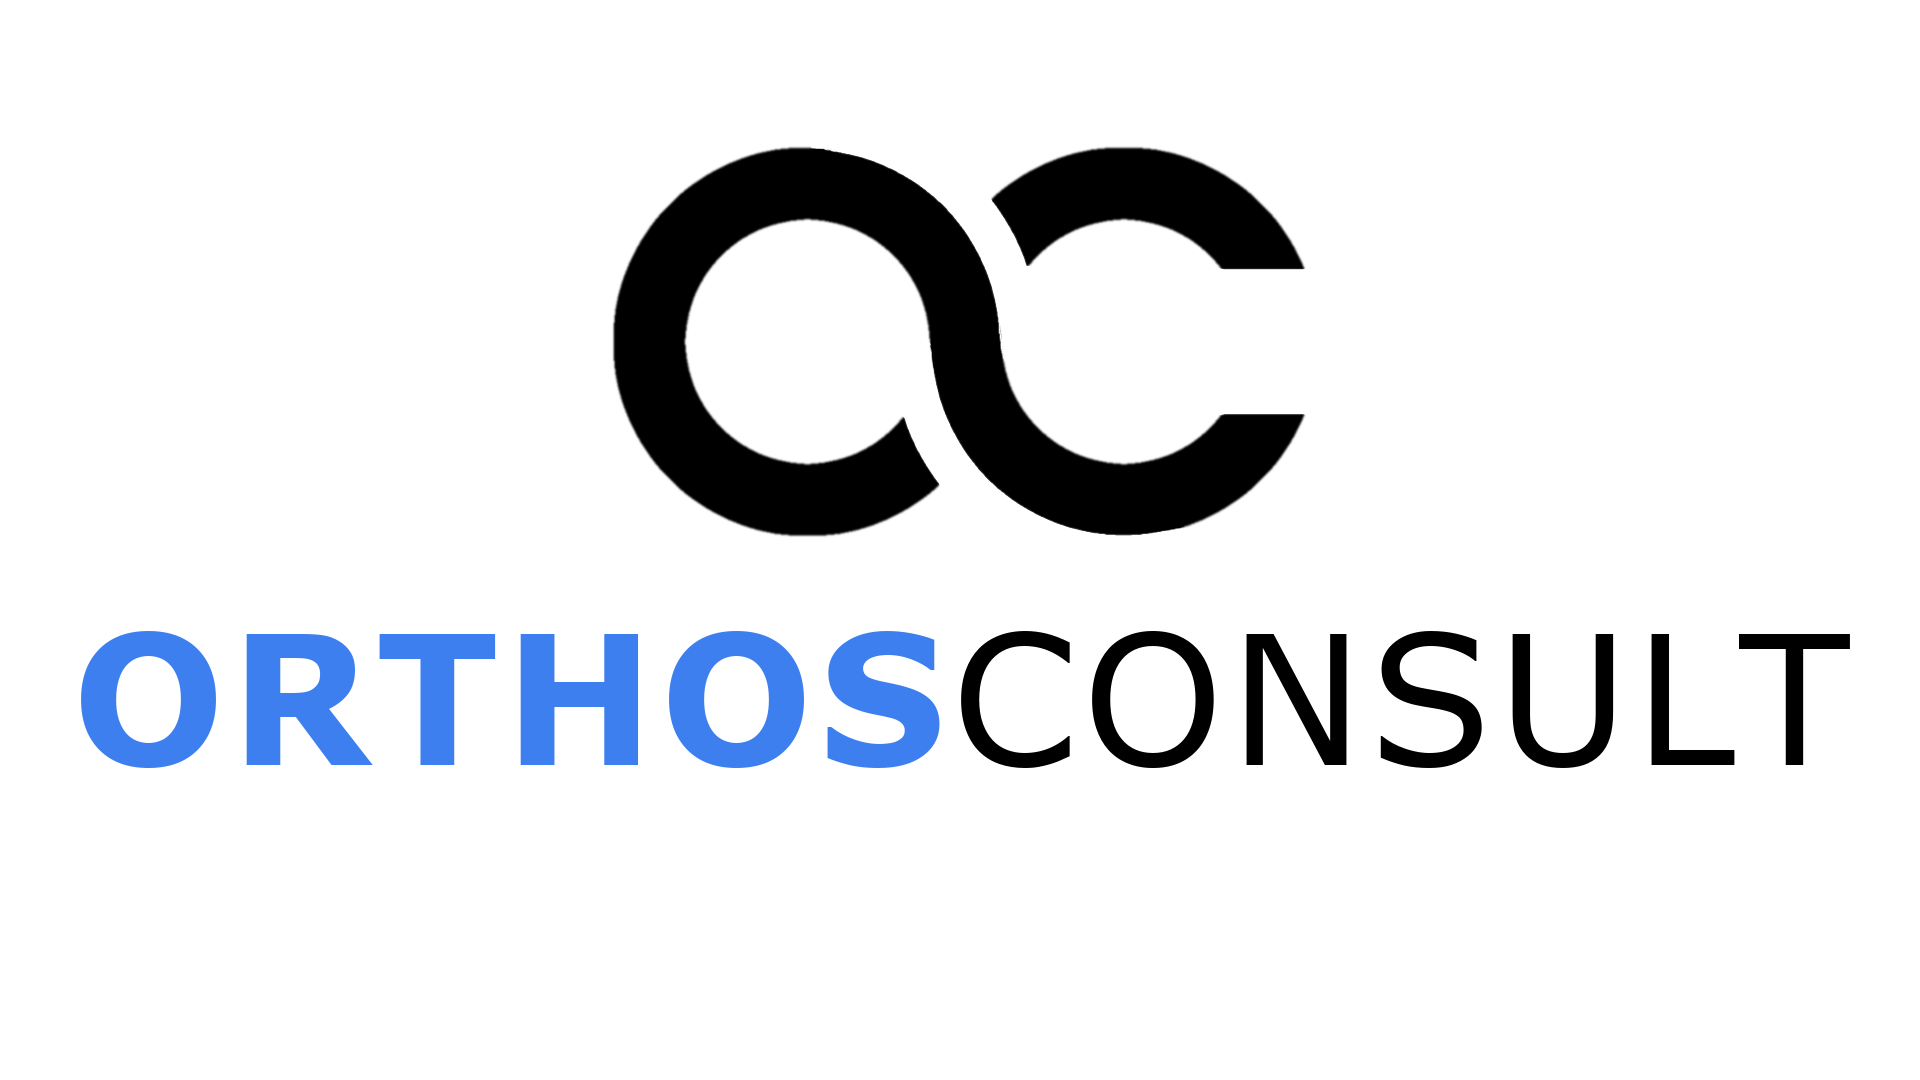 Orthos Consult GmbH & Co. KG